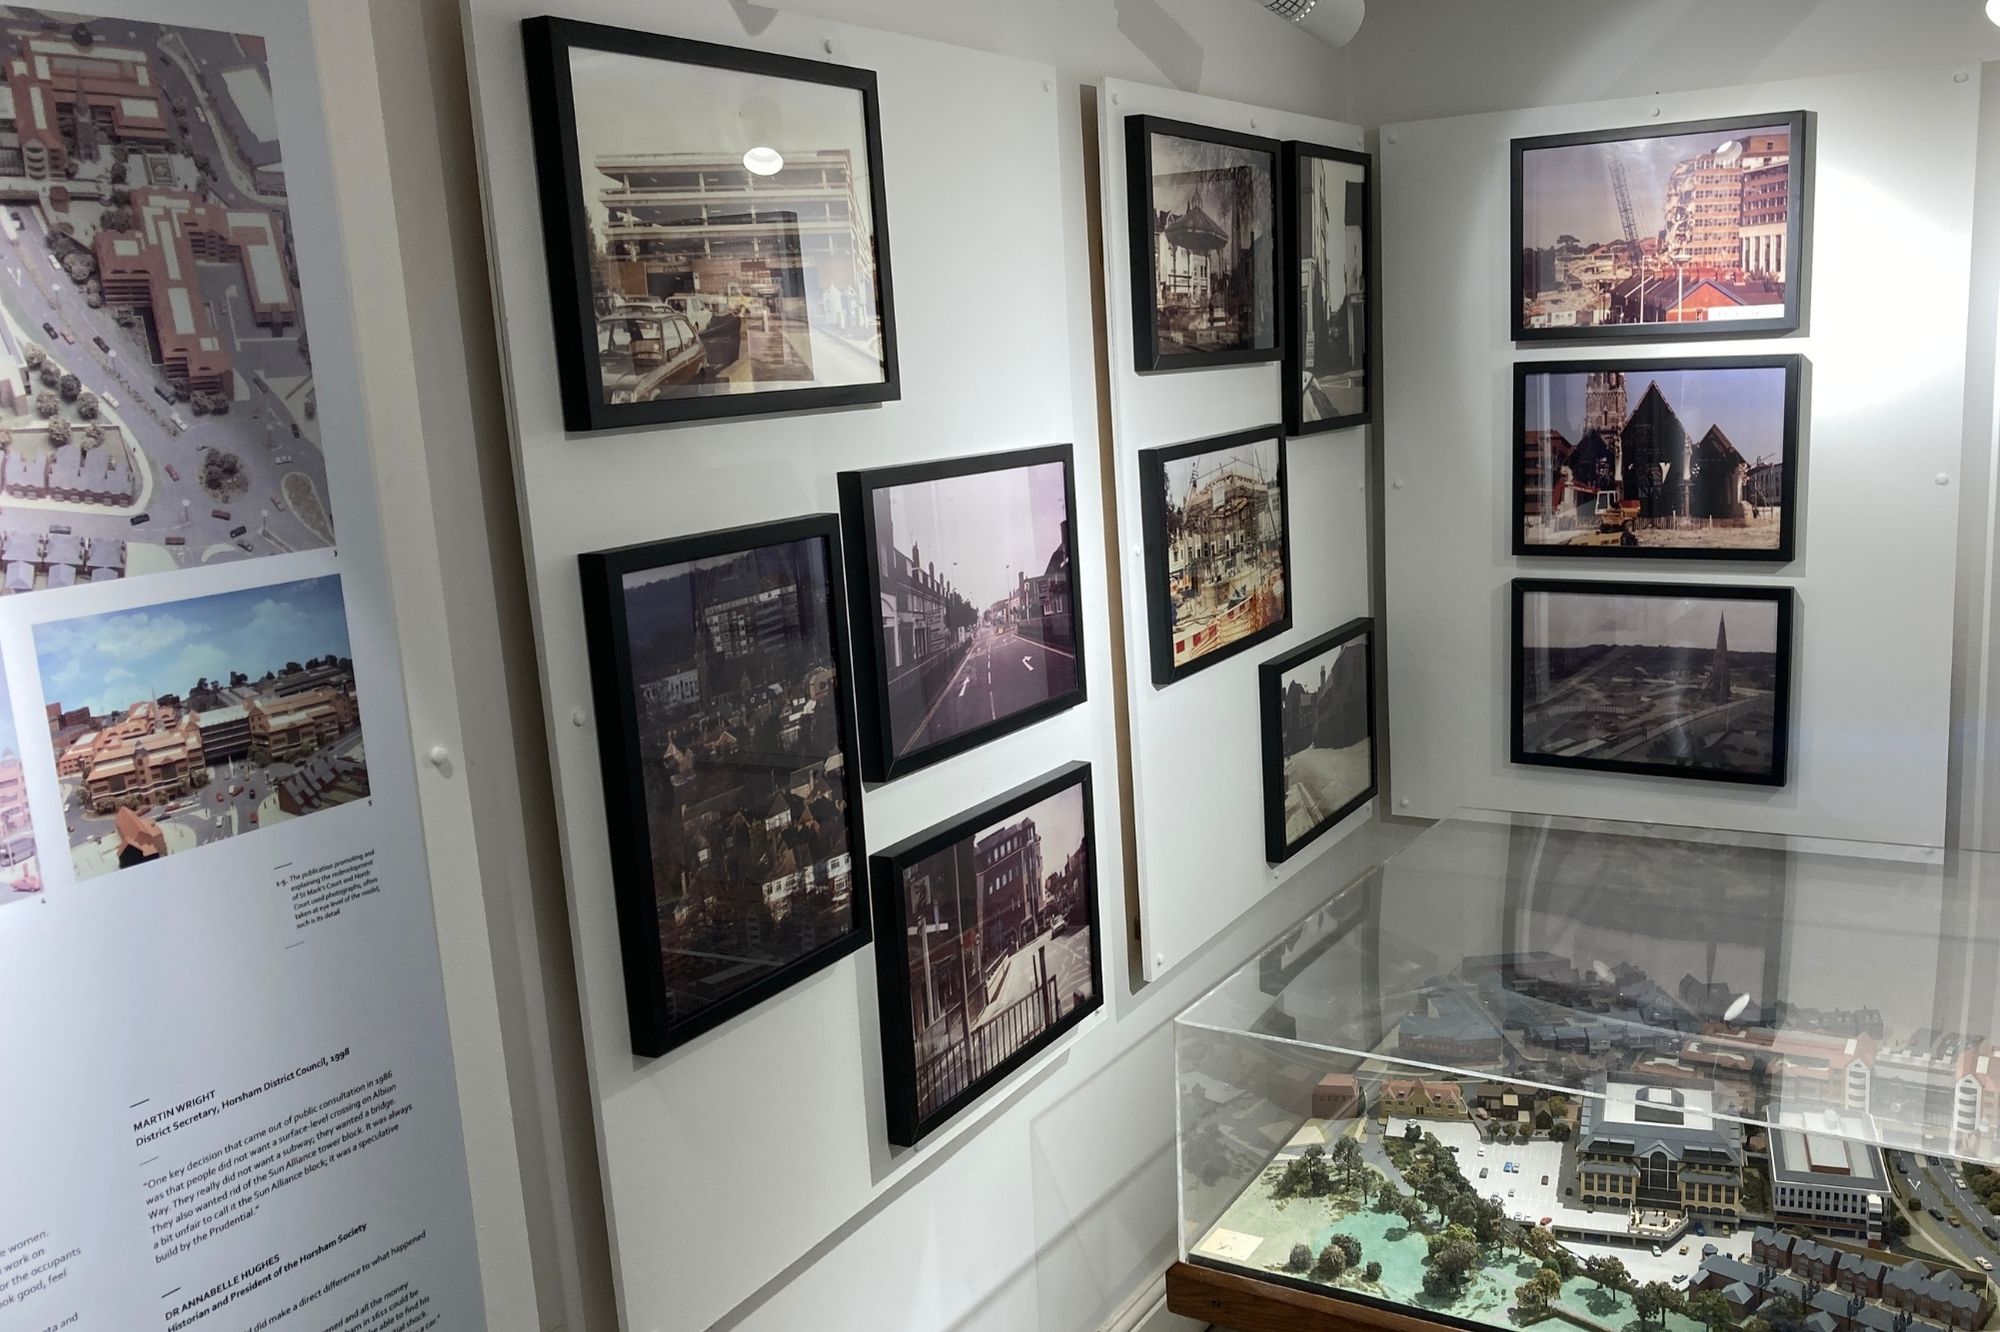 Photographs of Horsham town and town model